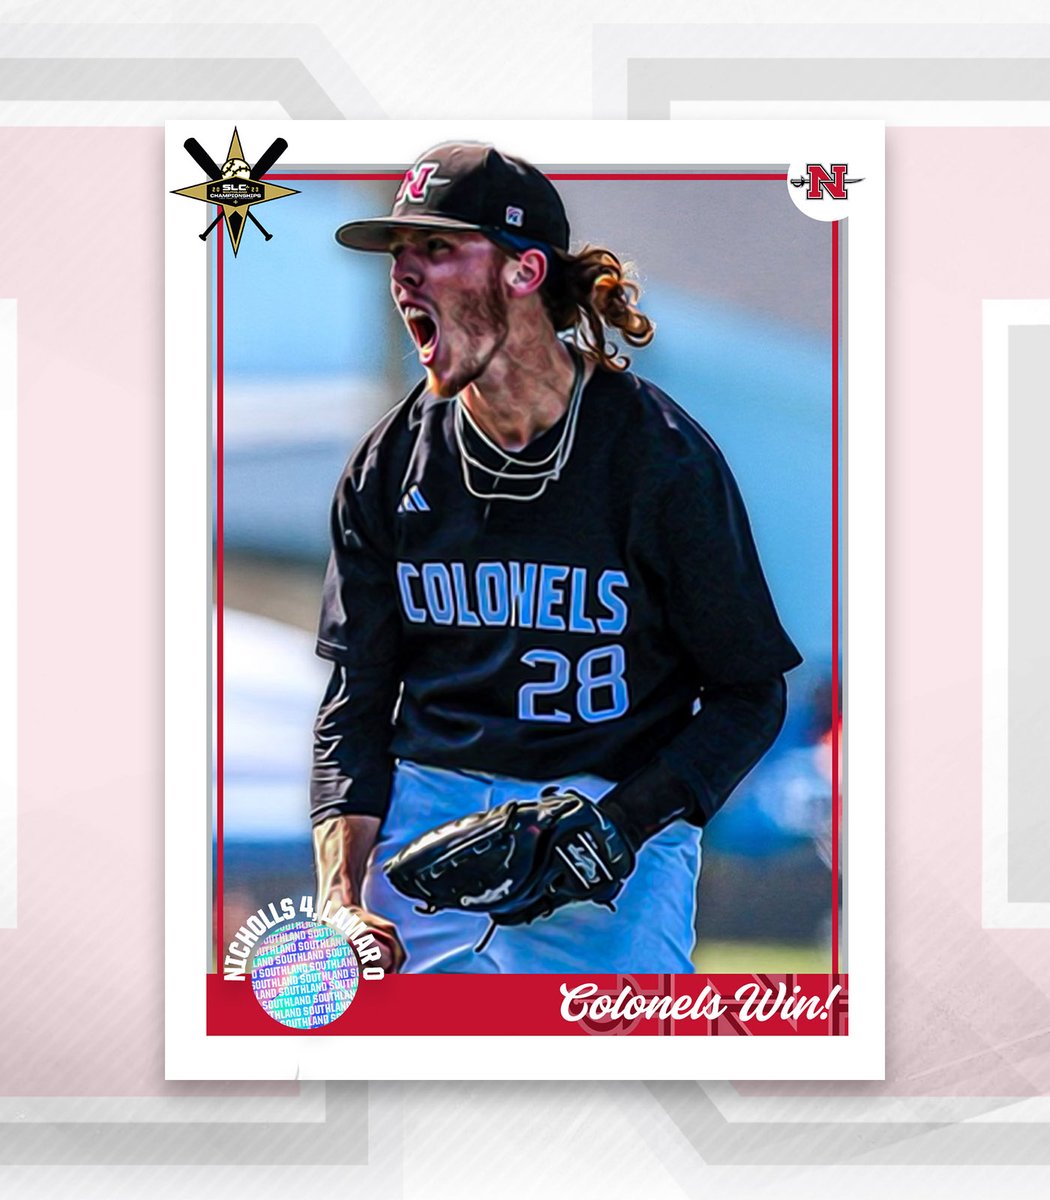 Colonels stay UNBEATEN!

Top-seeded Nicholls uses another strong pitching performance, this time from Mayers and Gearing, to eliminate No. 3 Lamar at the Southland Baseball Championship!

#EarnedEveryDay